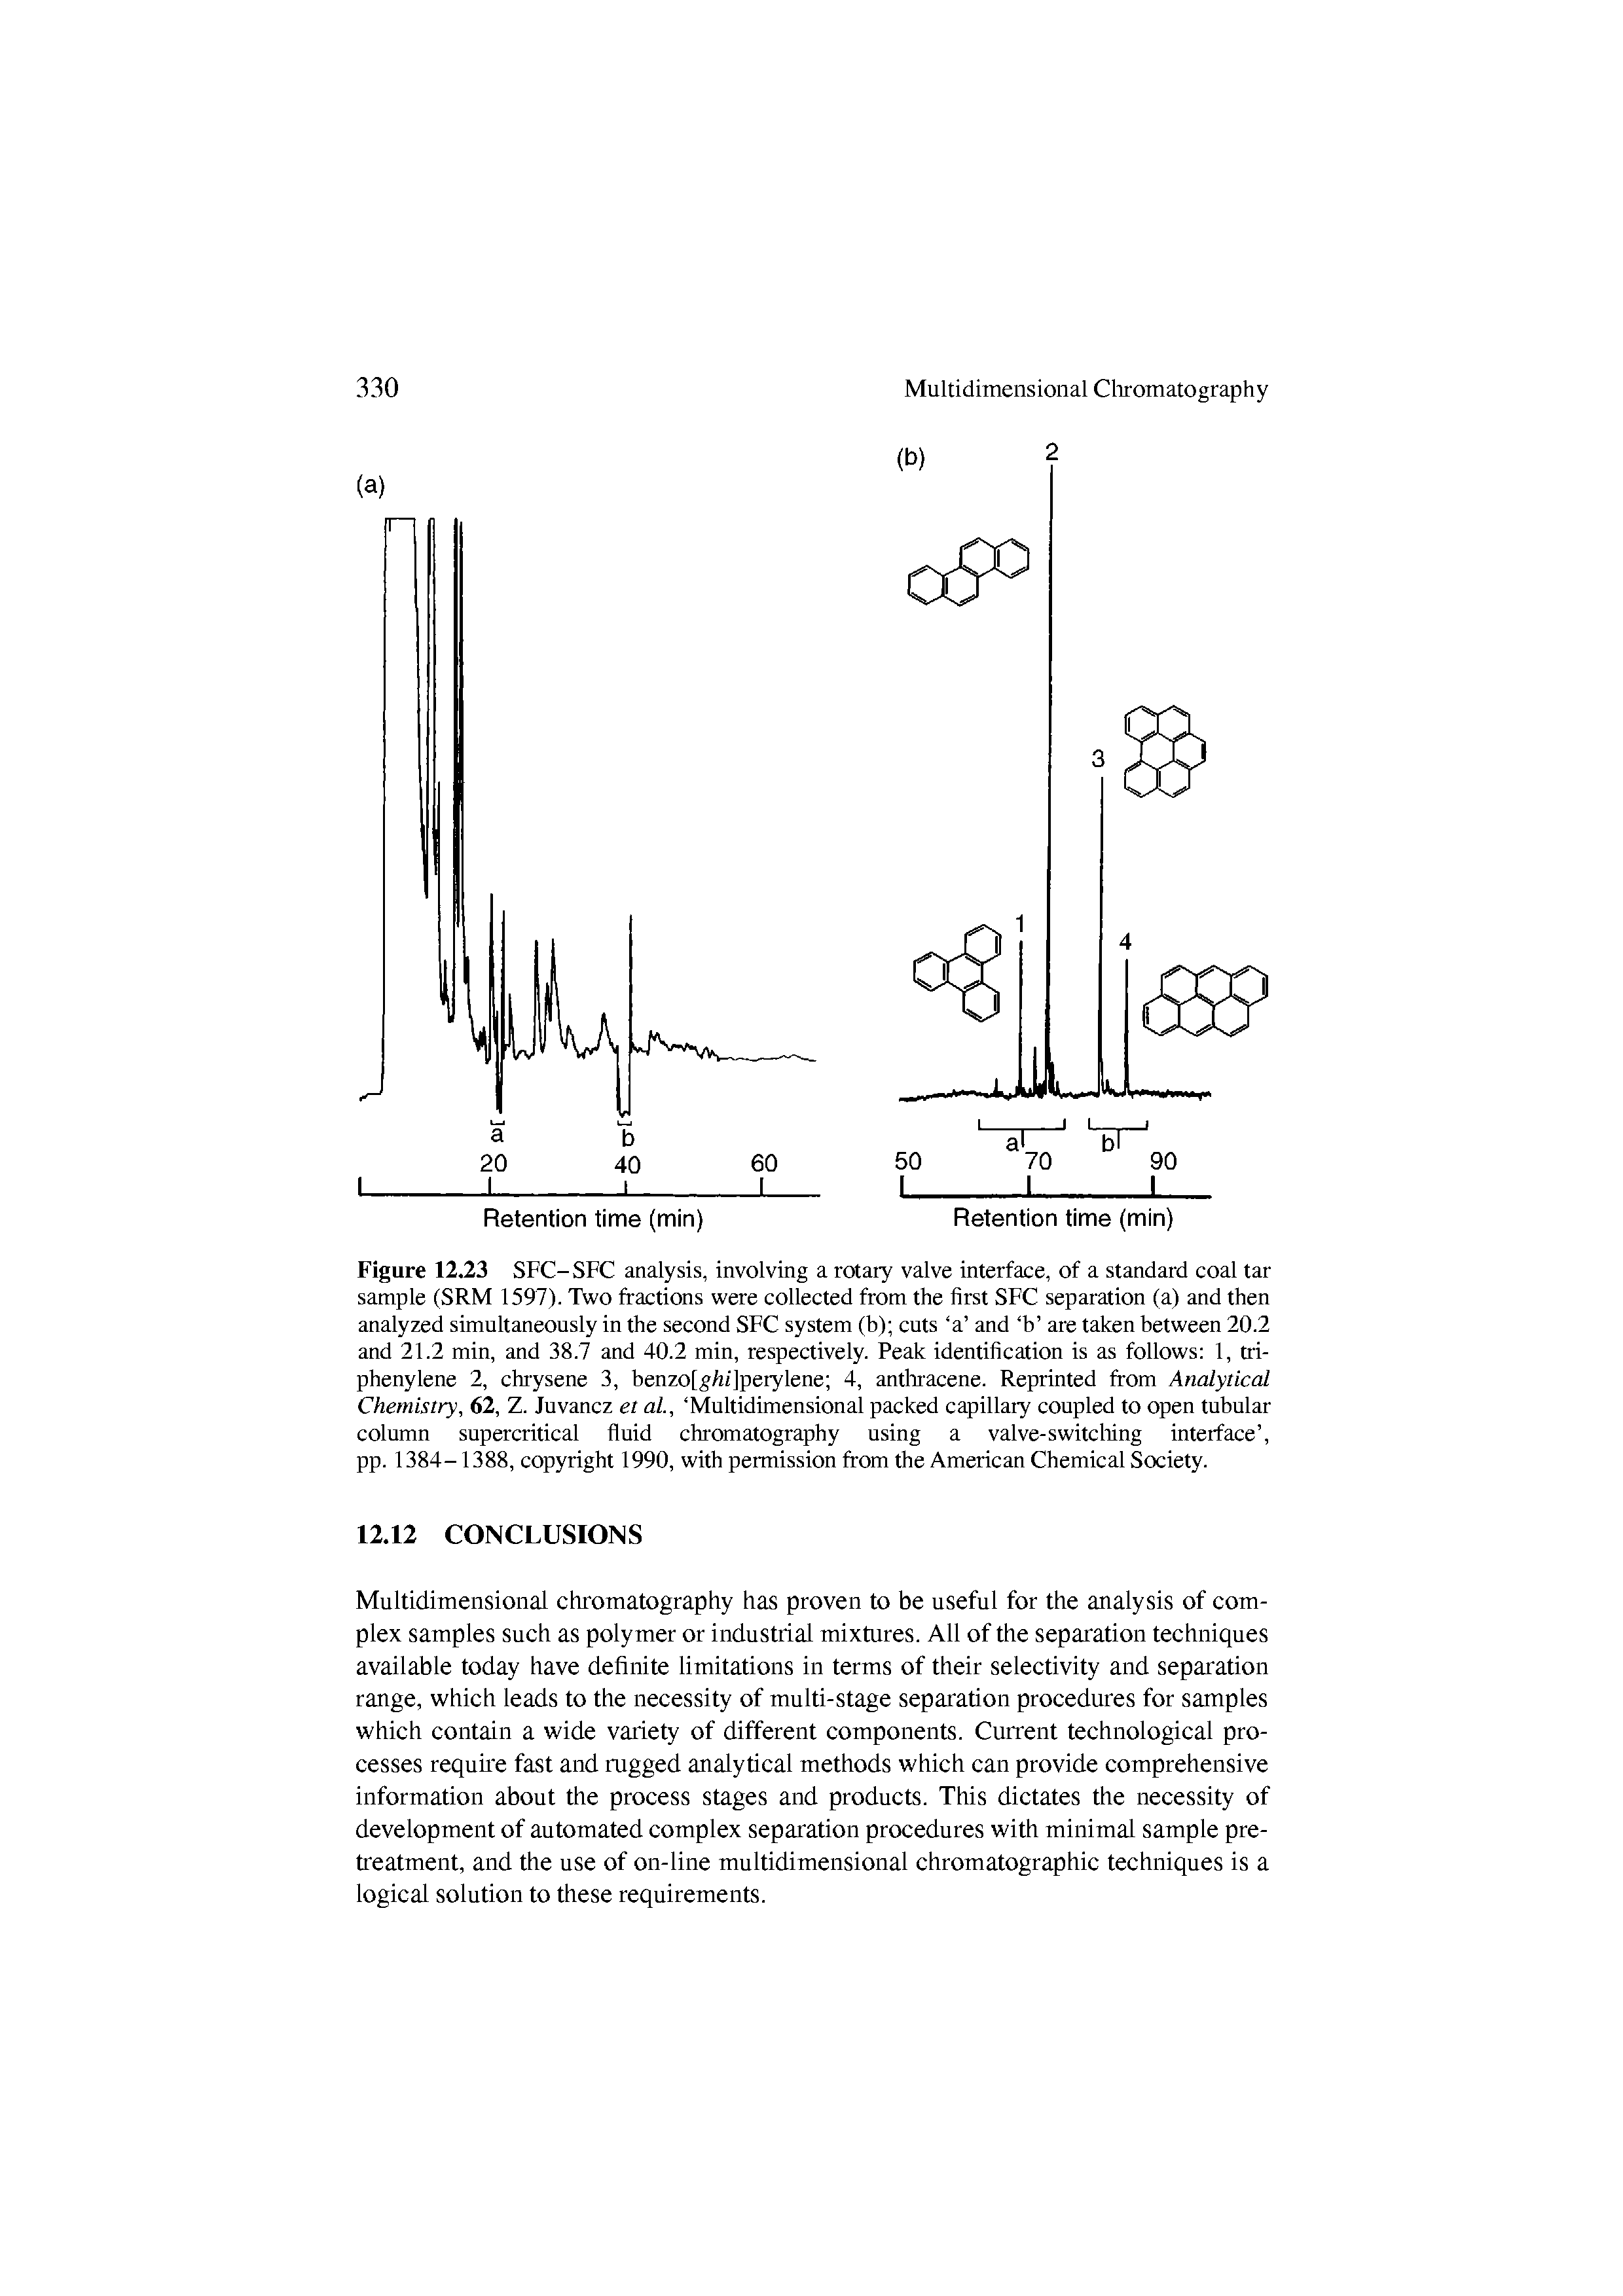 Figure 12.23 SFC-SFC analysis, involving a rotaiy valve interface, of a standard coal tar sample (SRM 1597). Two fractions were collected from the first SFC separation (a) and then analyzed simultaneously in the second SFC system (h) cuts a and h are taken between 20.2 and 21.2 min, and 38.7 and 40.2 min, respectively. Peak identification is as follows 1, tii-phenylene 2, chrysene 3, henzo[g/ i]perylene 4, antliracene. Reprinted from Analytical Chemistry, 62, Z. Juvancz et al, Multidimensional packed capillary coupled to open tubular column supercritical fluid chromatography using a valve-switcliing interface , pp. 1384-1388, copyright 1990, with permission from the American Chemical Society.